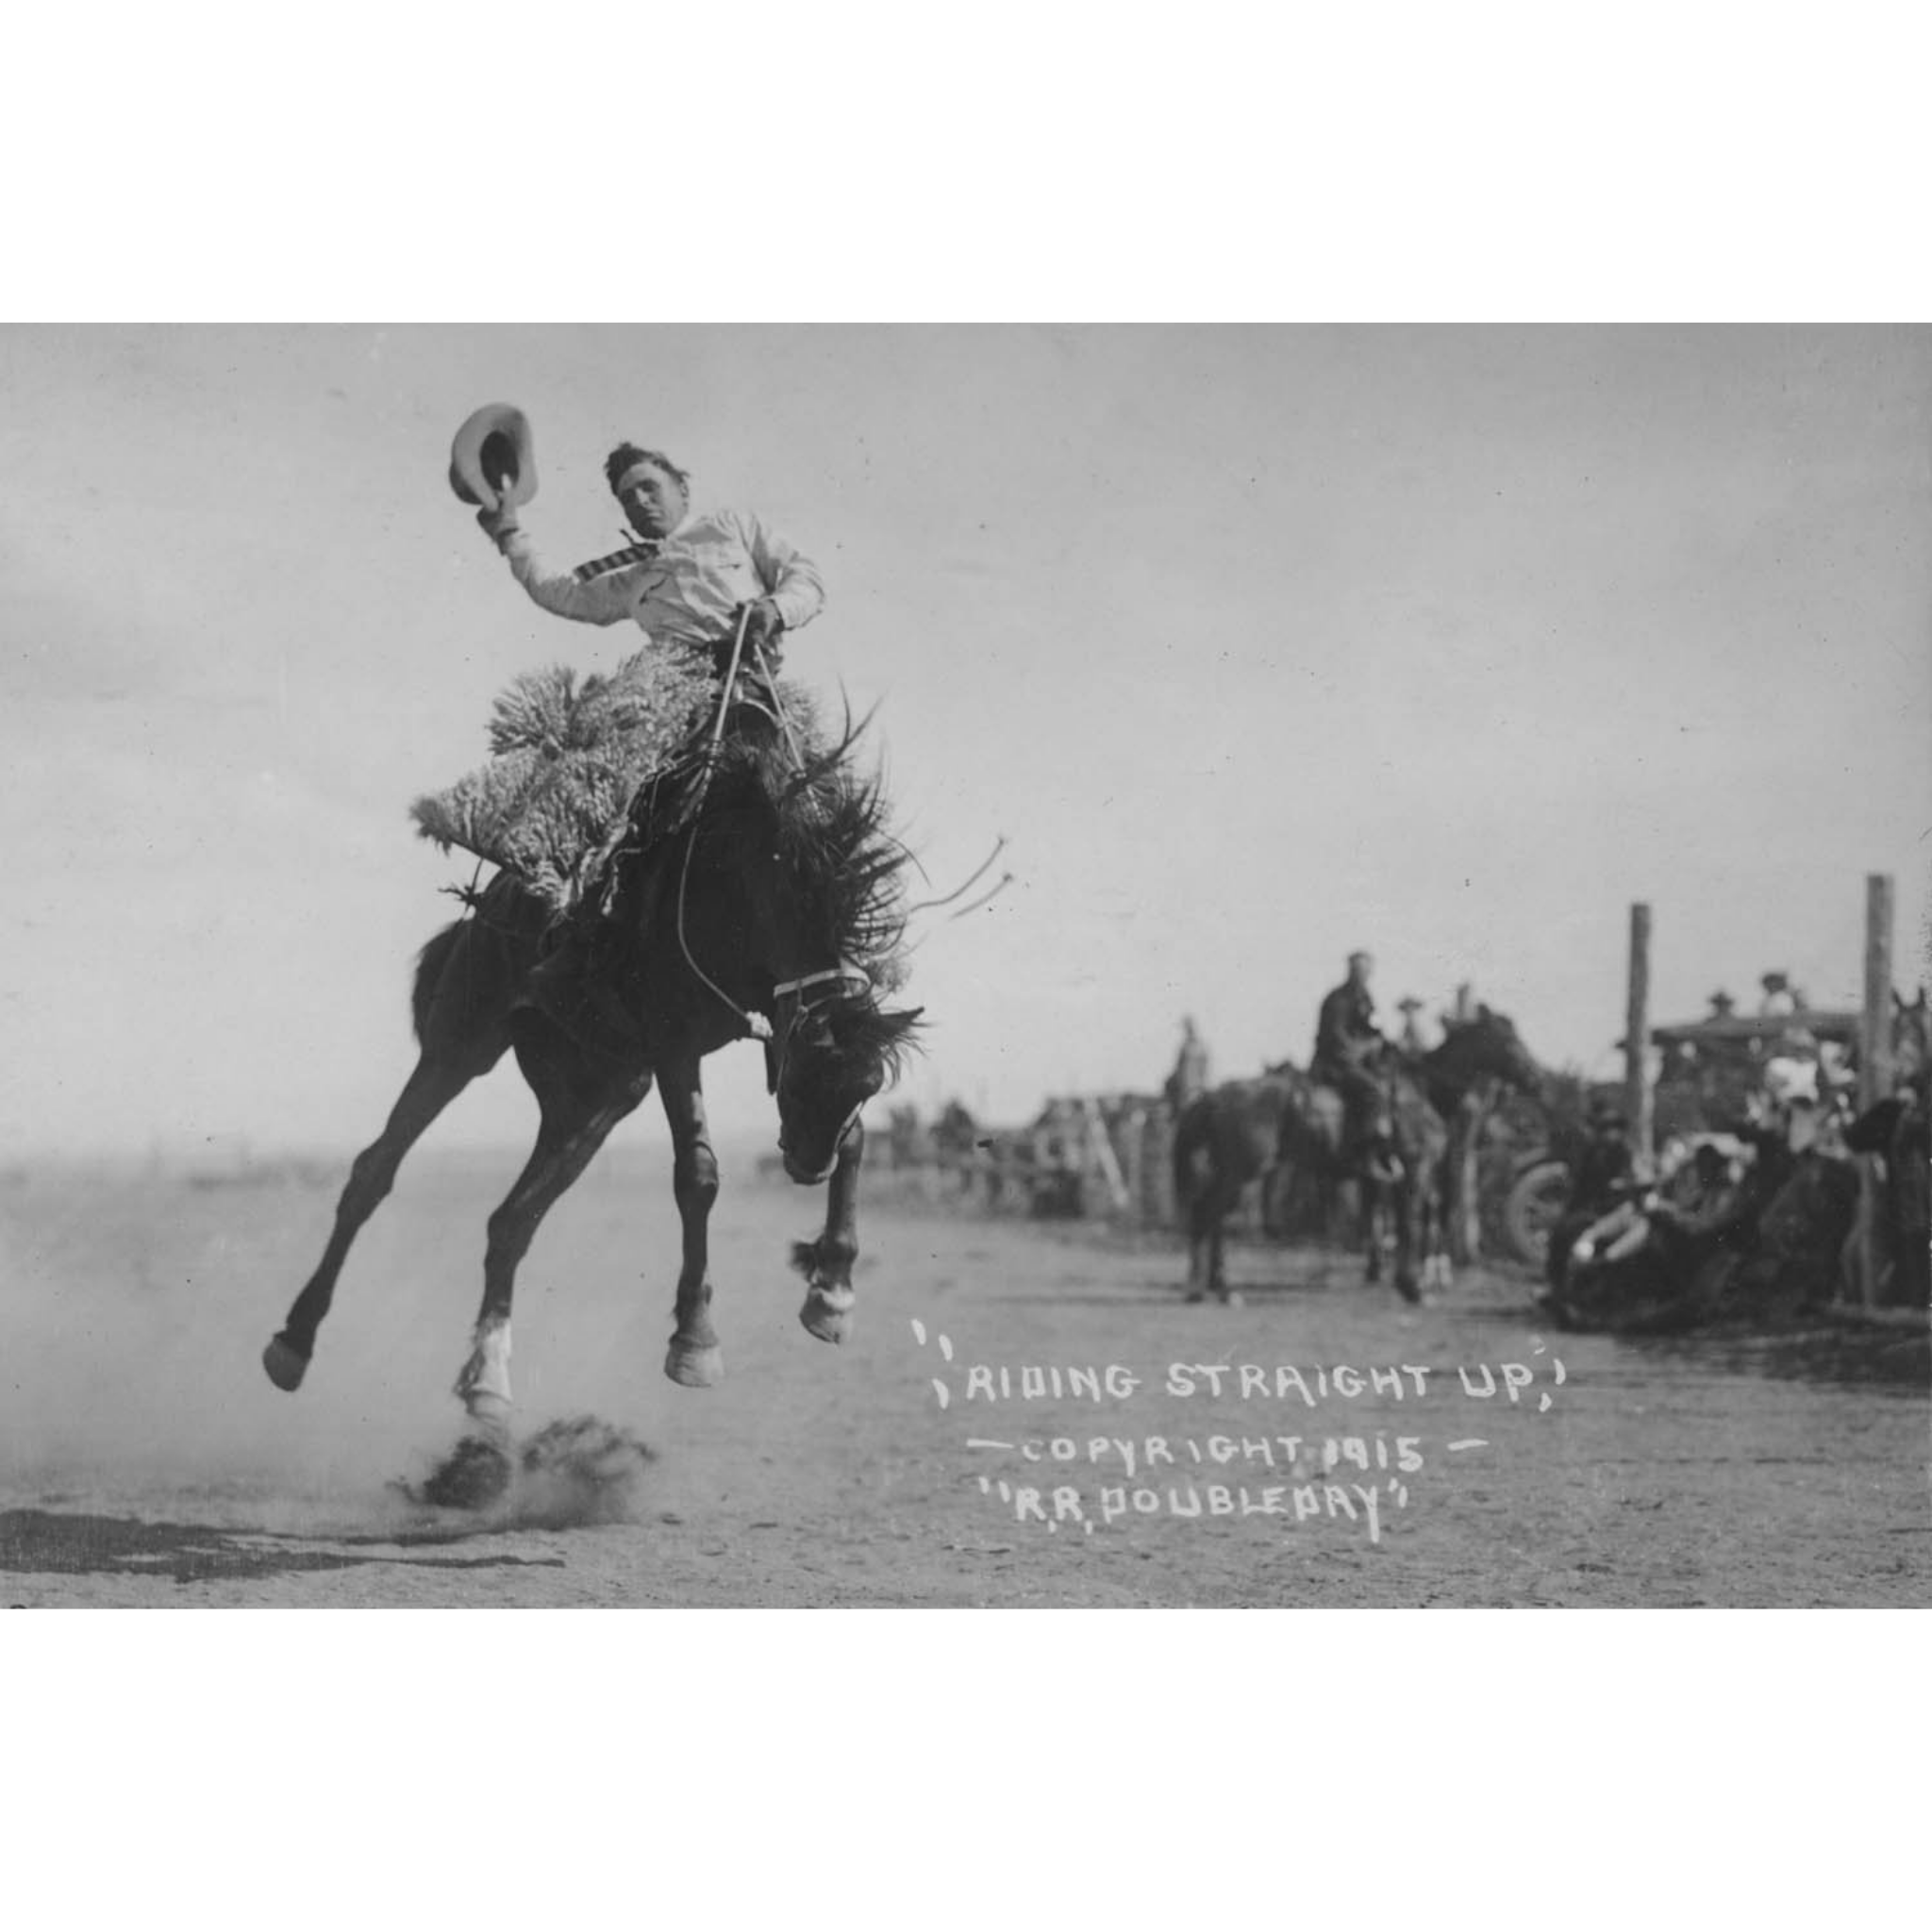 Rodeo Cowboys 5 - Riding Straight Up - ca. 1916